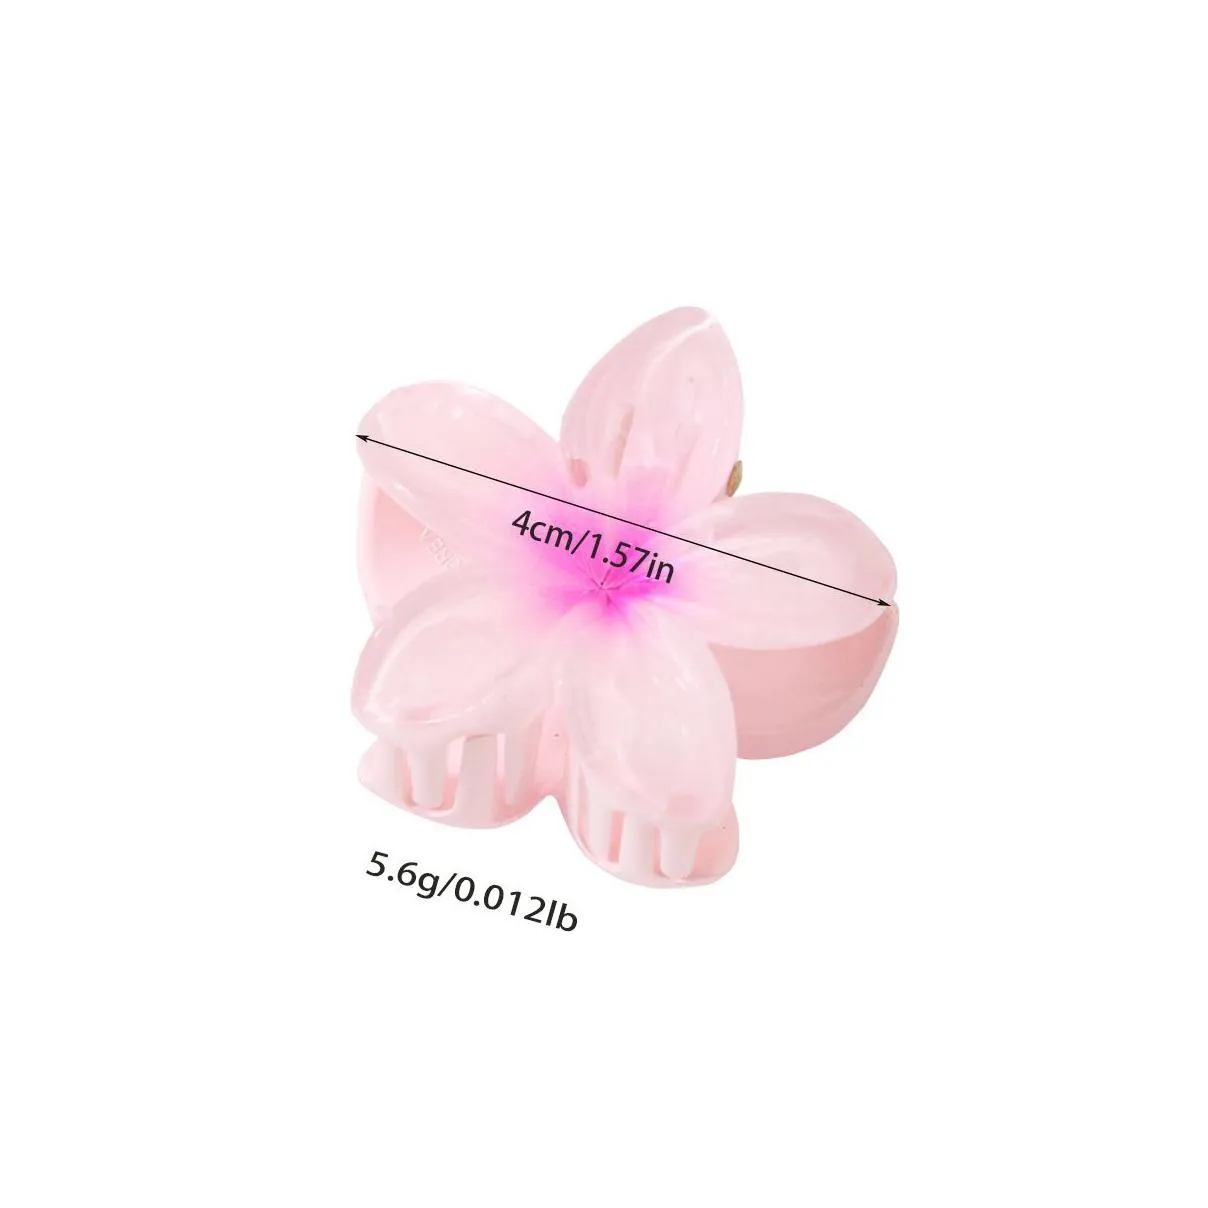 4cm Candy Color Women Fashionable Hair Clips Cute Mini Flower Shaped Hair Claw Clips Girls Sweet Headwear Styling Hair Accessories Tool